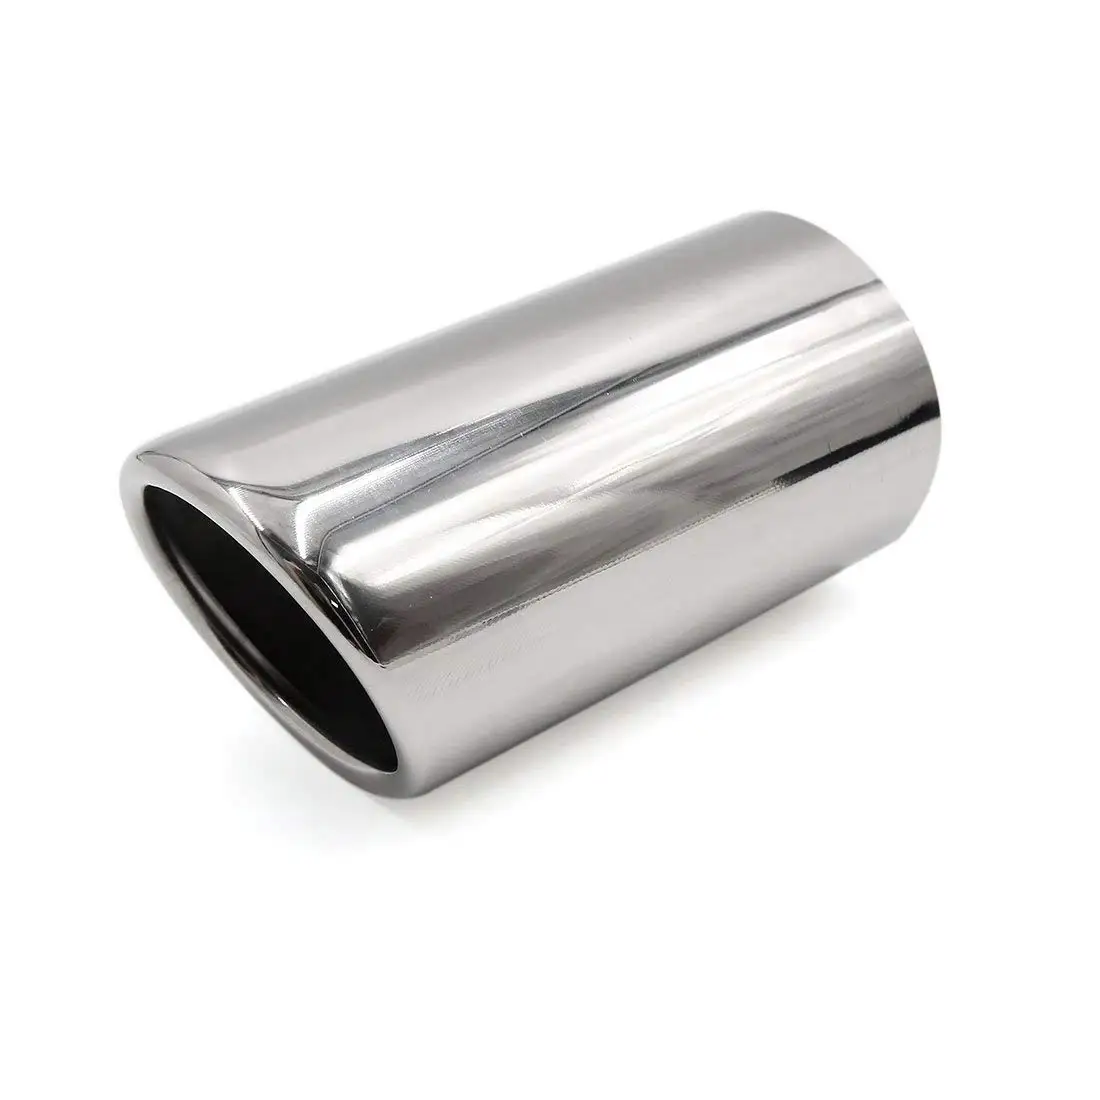 

uxcell Car Stainless Steel Exhaust Tail Muffler Tip Pipe for VW Golf 6 7 MK7 Scirocco Sagitar 1.4T